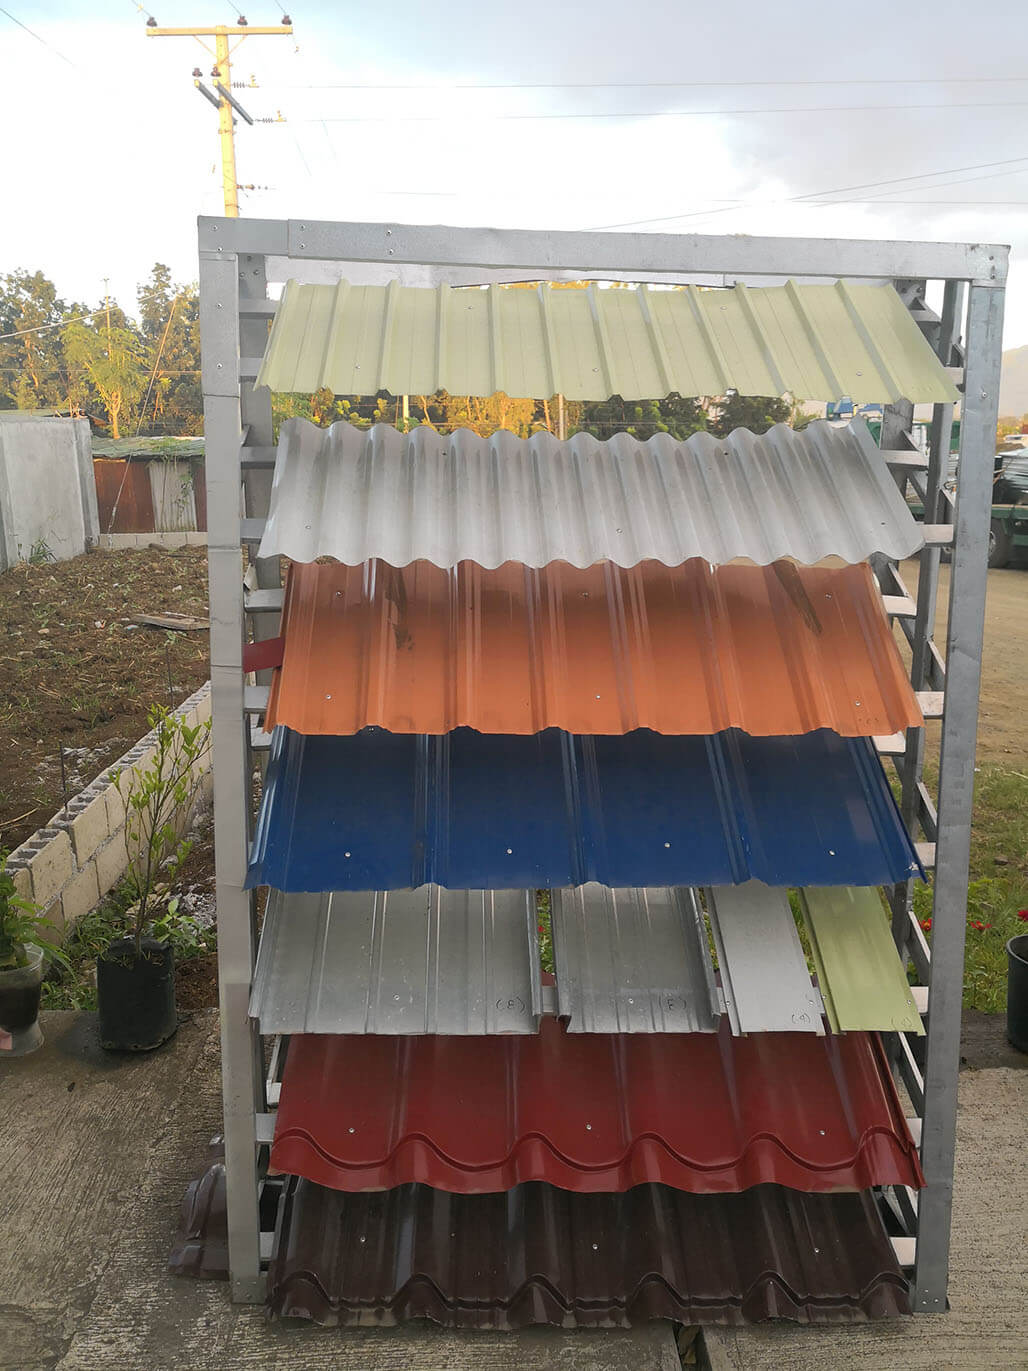 Stainless Roof Gutters Alpha Steel Roofing Supplier In The